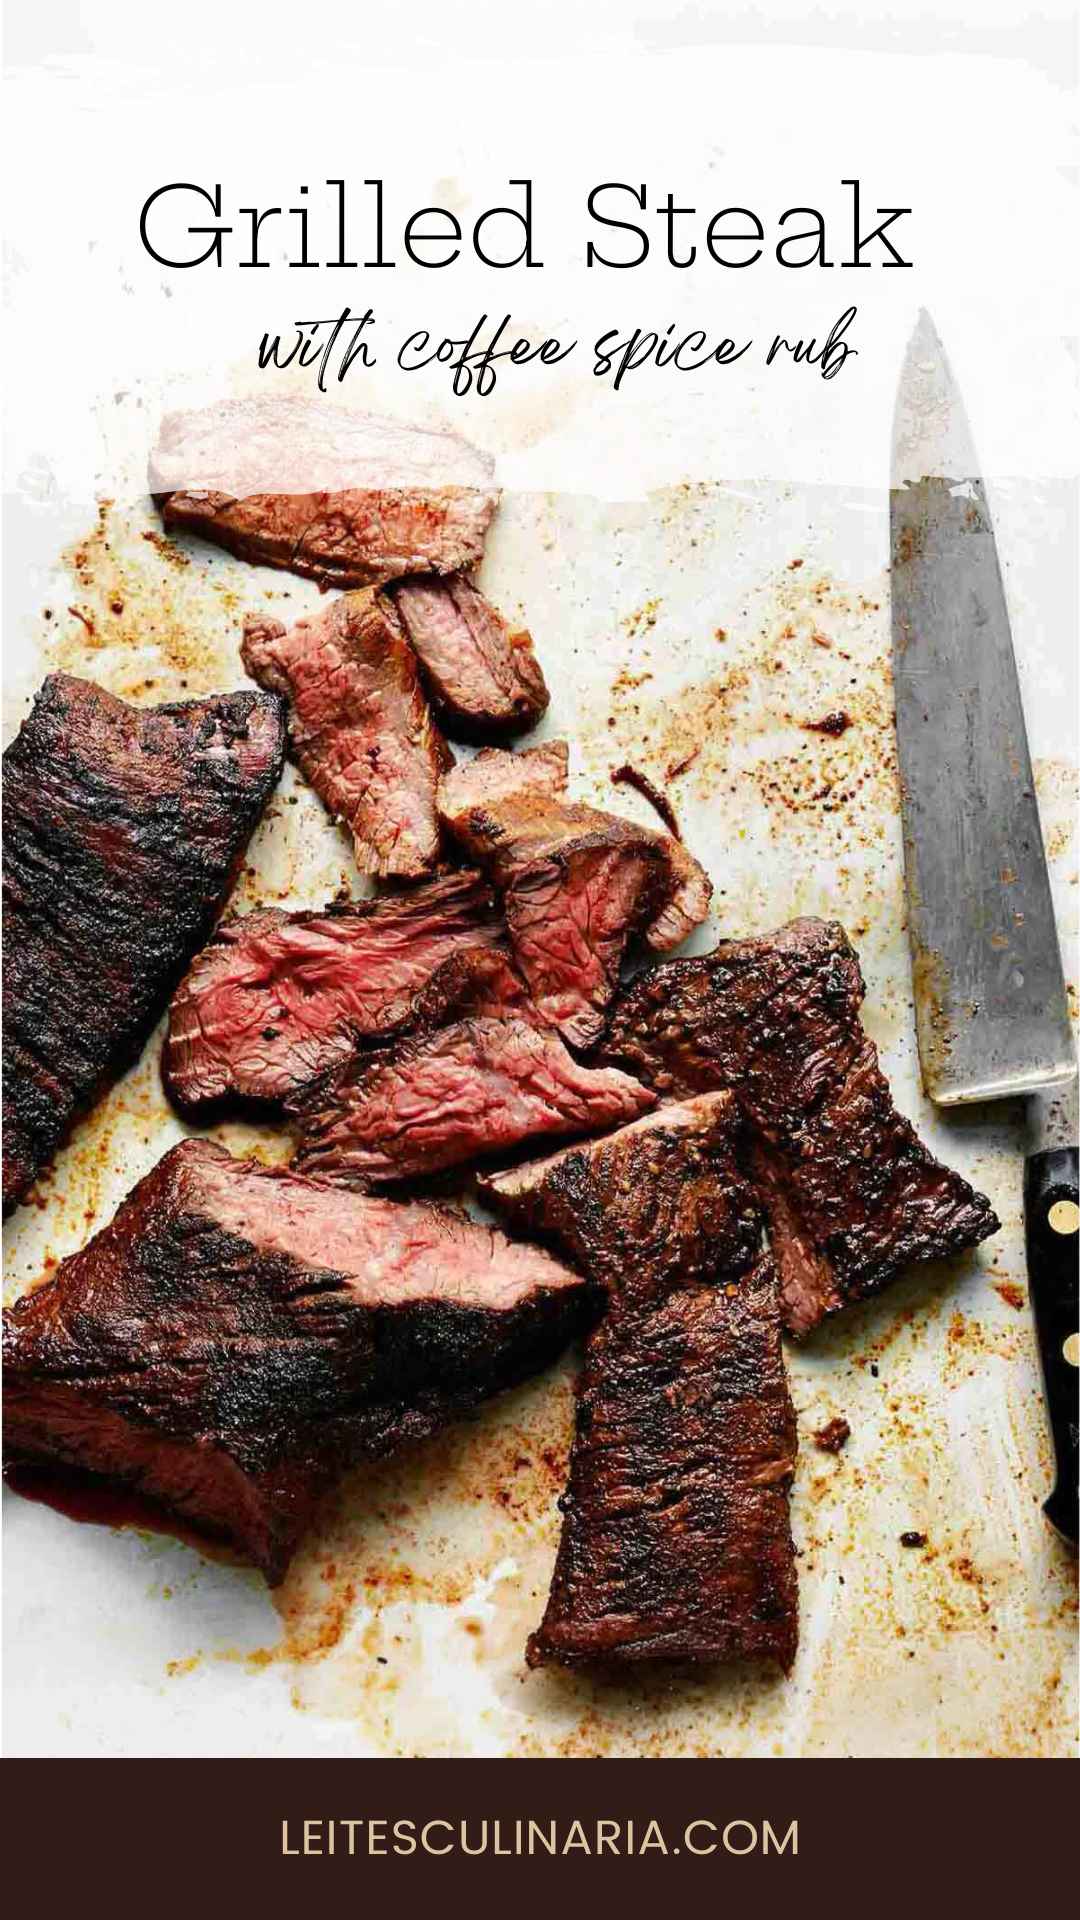 A grilled skirt steak sliced into pieces with a chef's knife on the side.